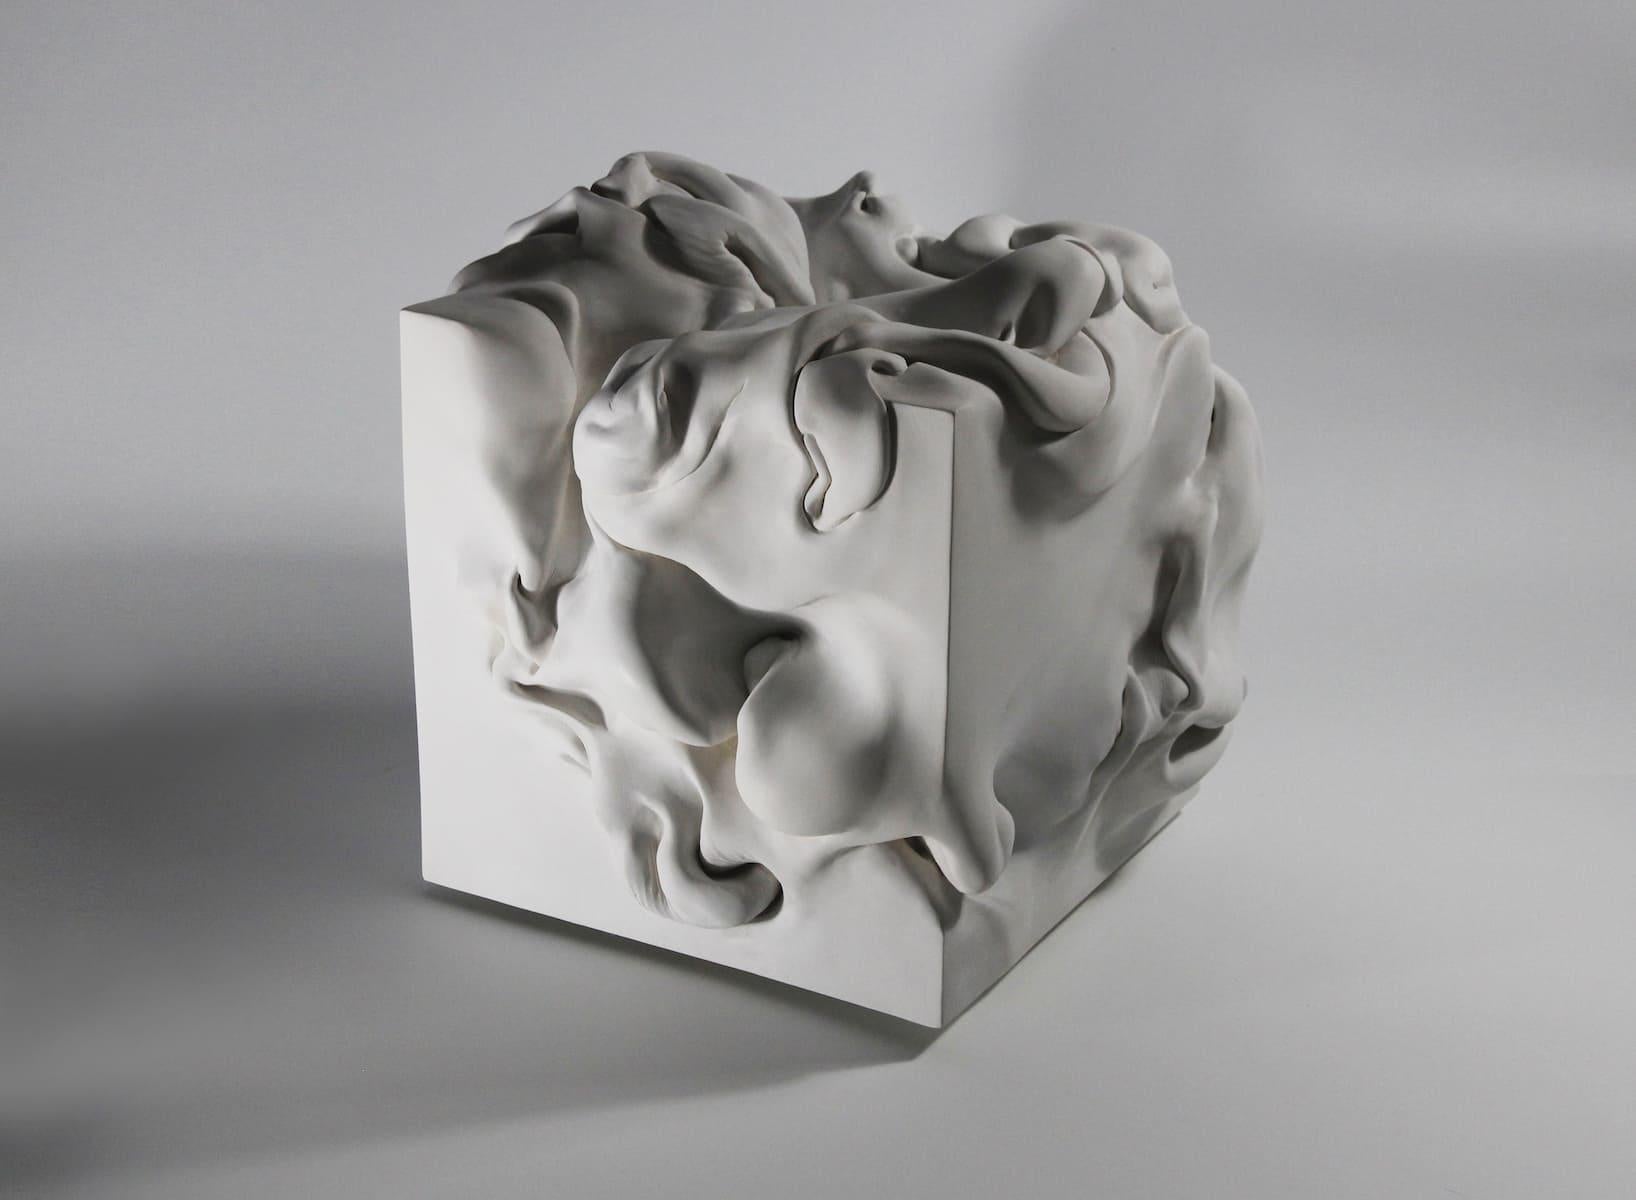 Cube 5 by Sharon Brill - Abstract Clay Sculpture, white, organic forms